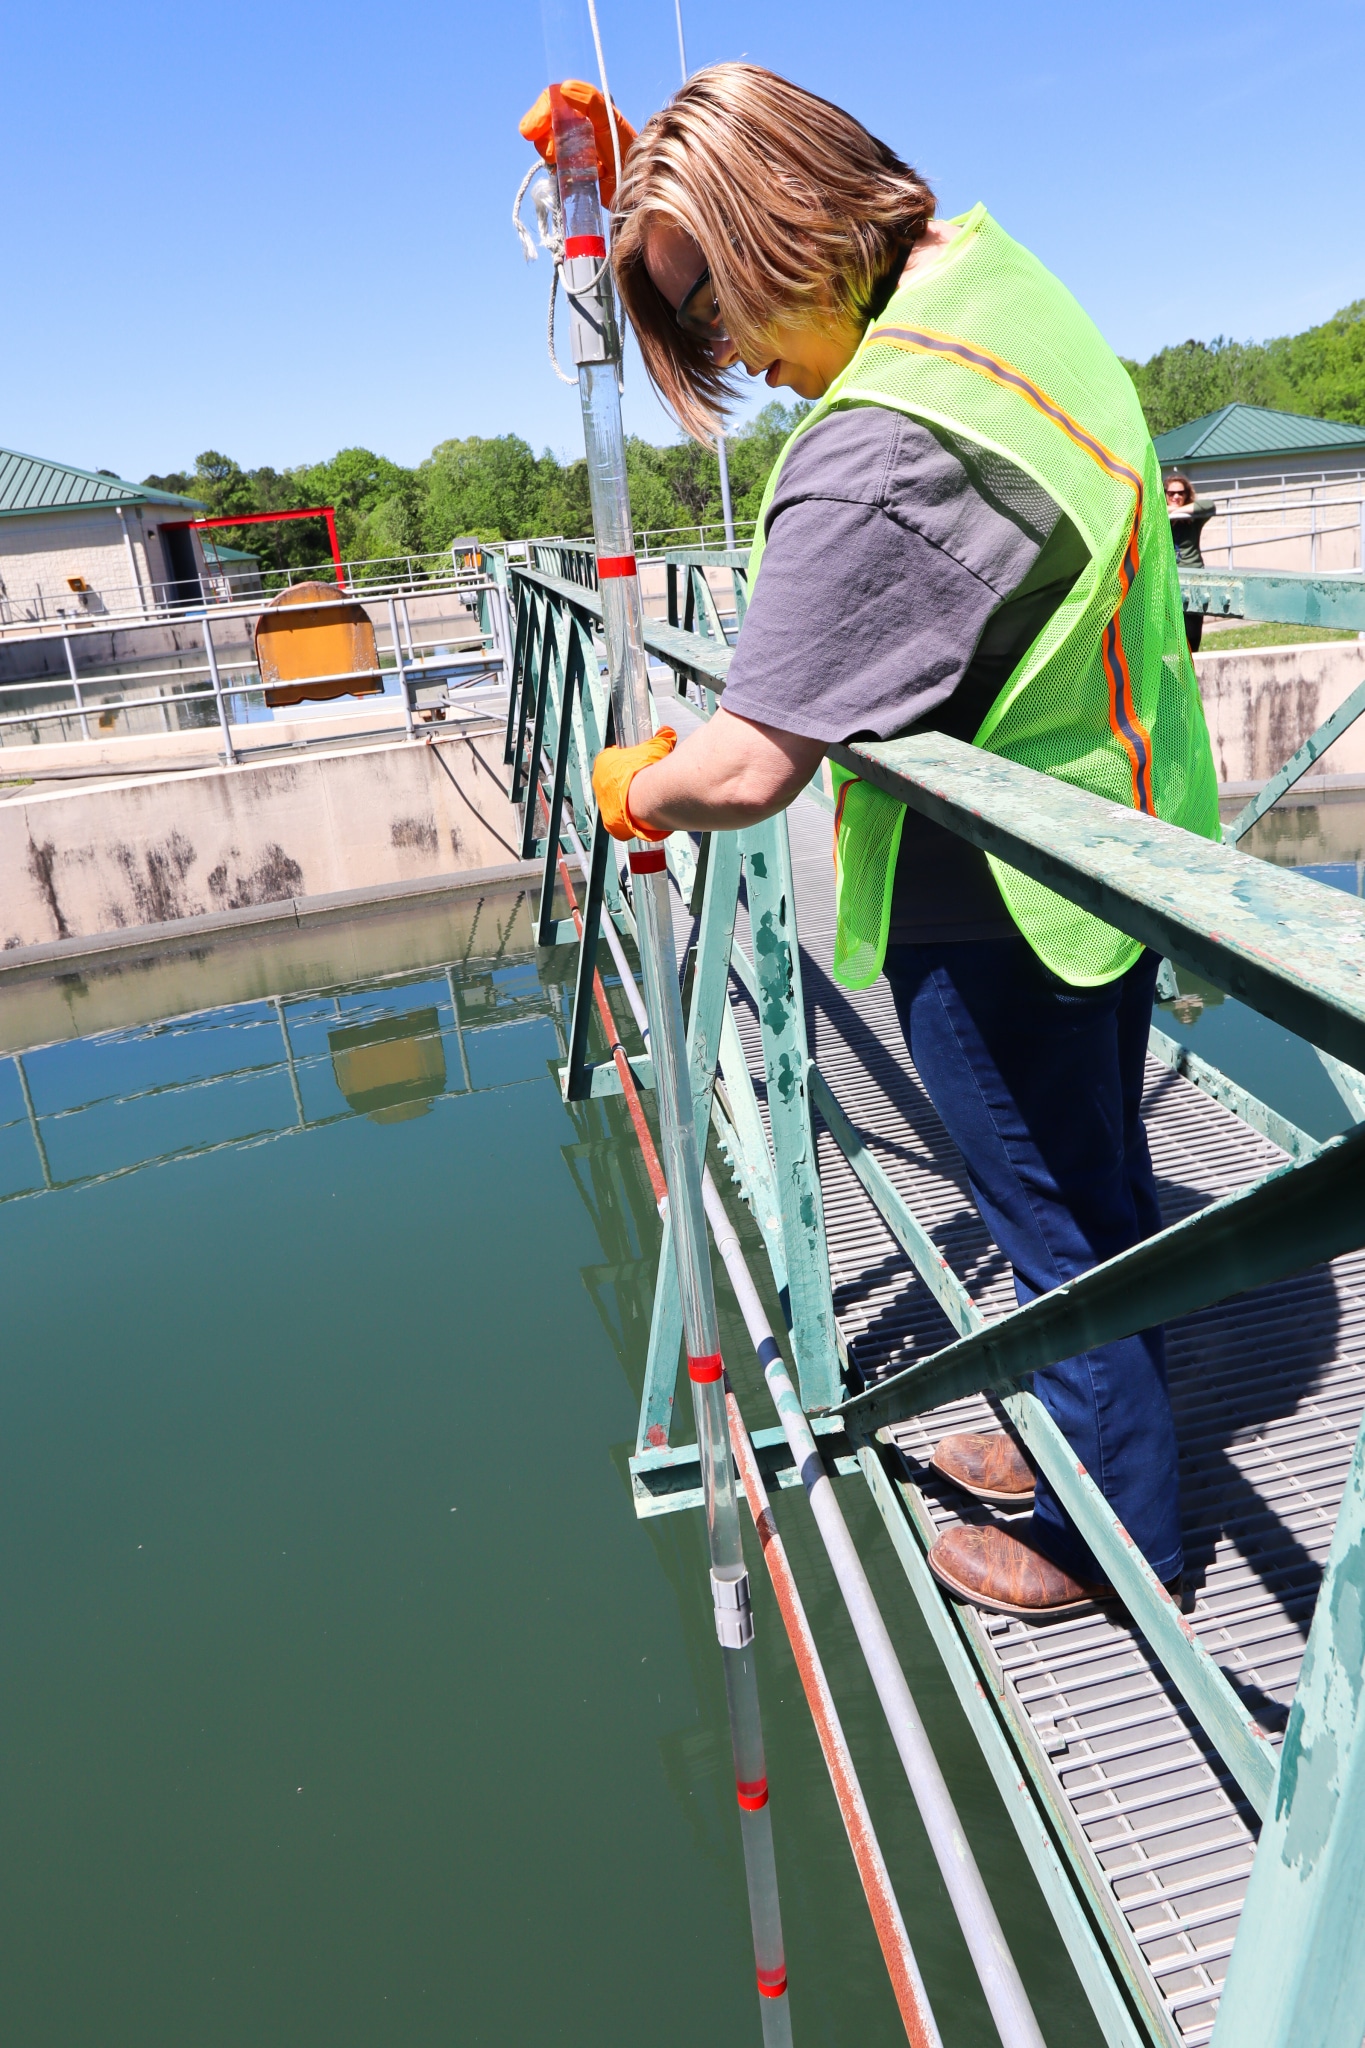 White at the Leeds location checking levels of solid materials that have settled to the bottom of a clarifier. Photo by Christine Hull for Bham Now